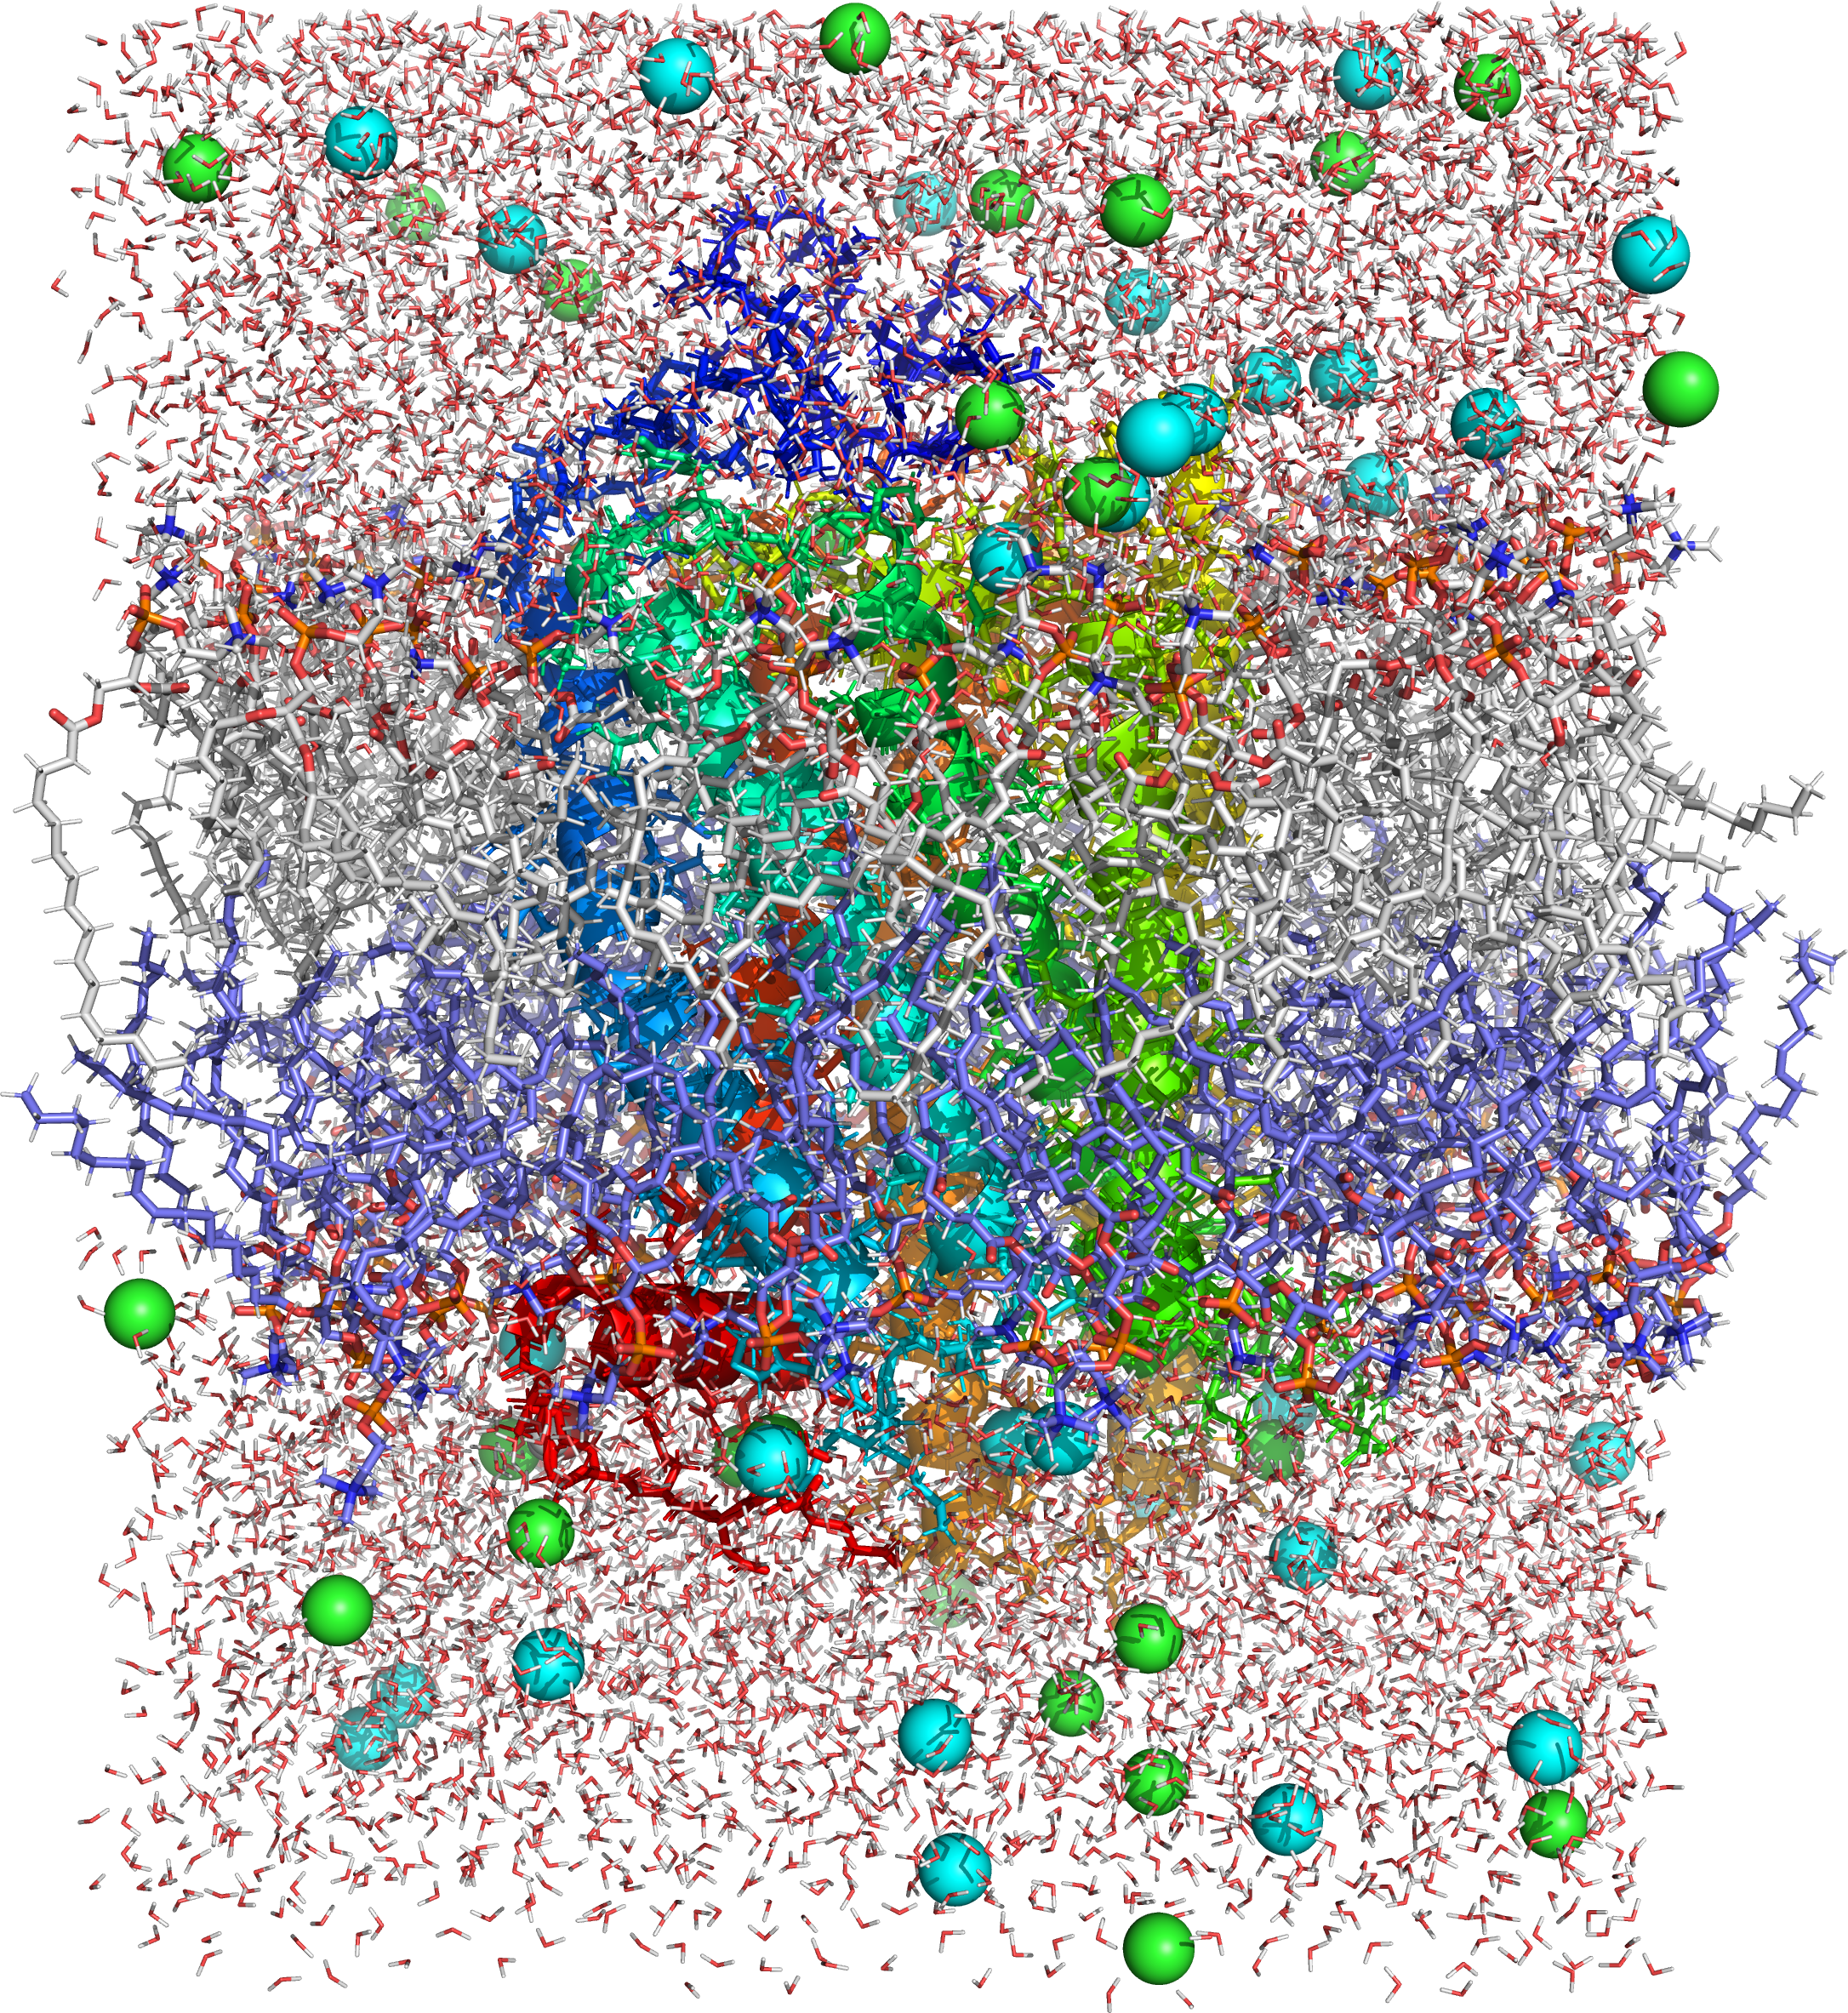 Picture of a molecular dynamics simulation of a cell membrane/protein complex consisting of bovine rhodopsin incorporated of a phosphatidylcholine (1-palmitoyl-2-oleoyl-sn-glycero-3-phosphocholine, POPC) lipid bylayer. POPC and water molecules are depicted as sticks. The lipid layers facing the extracellular and cytoplasmic spaces are shown in white and blue, respectively. Both the extra- and intracellular interfaces are covered with layers of water. The secondary structure of rhodopsin is depicted in rainbow colored cartoon representation. Potassium and chloride ions are shown as spheres (colored in cyan and green, respectively). Image generated from PDB file obtained from the CHARMM-GUI Archive - Protein/Membrane Complex Library using the open source molecular visualization tool PyMol.